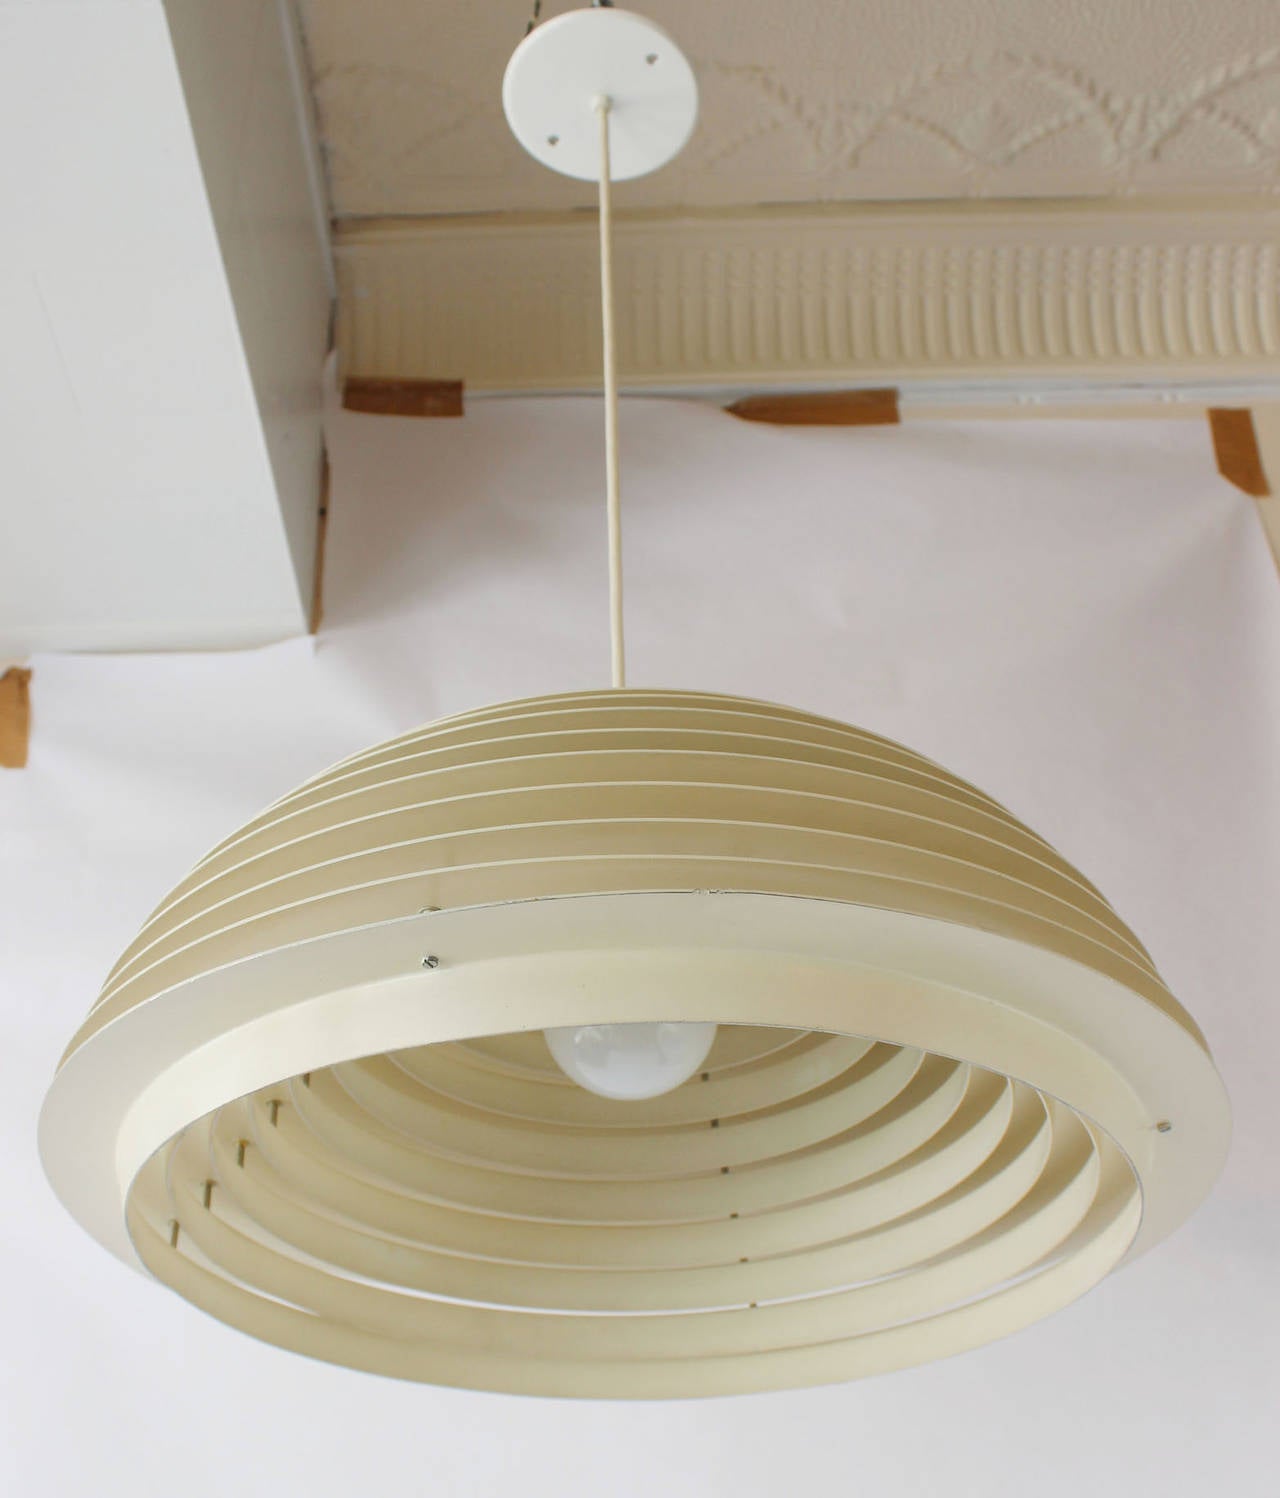 An enameled metal tiered pendant with porcelain socket, by Luminaires Chicago.